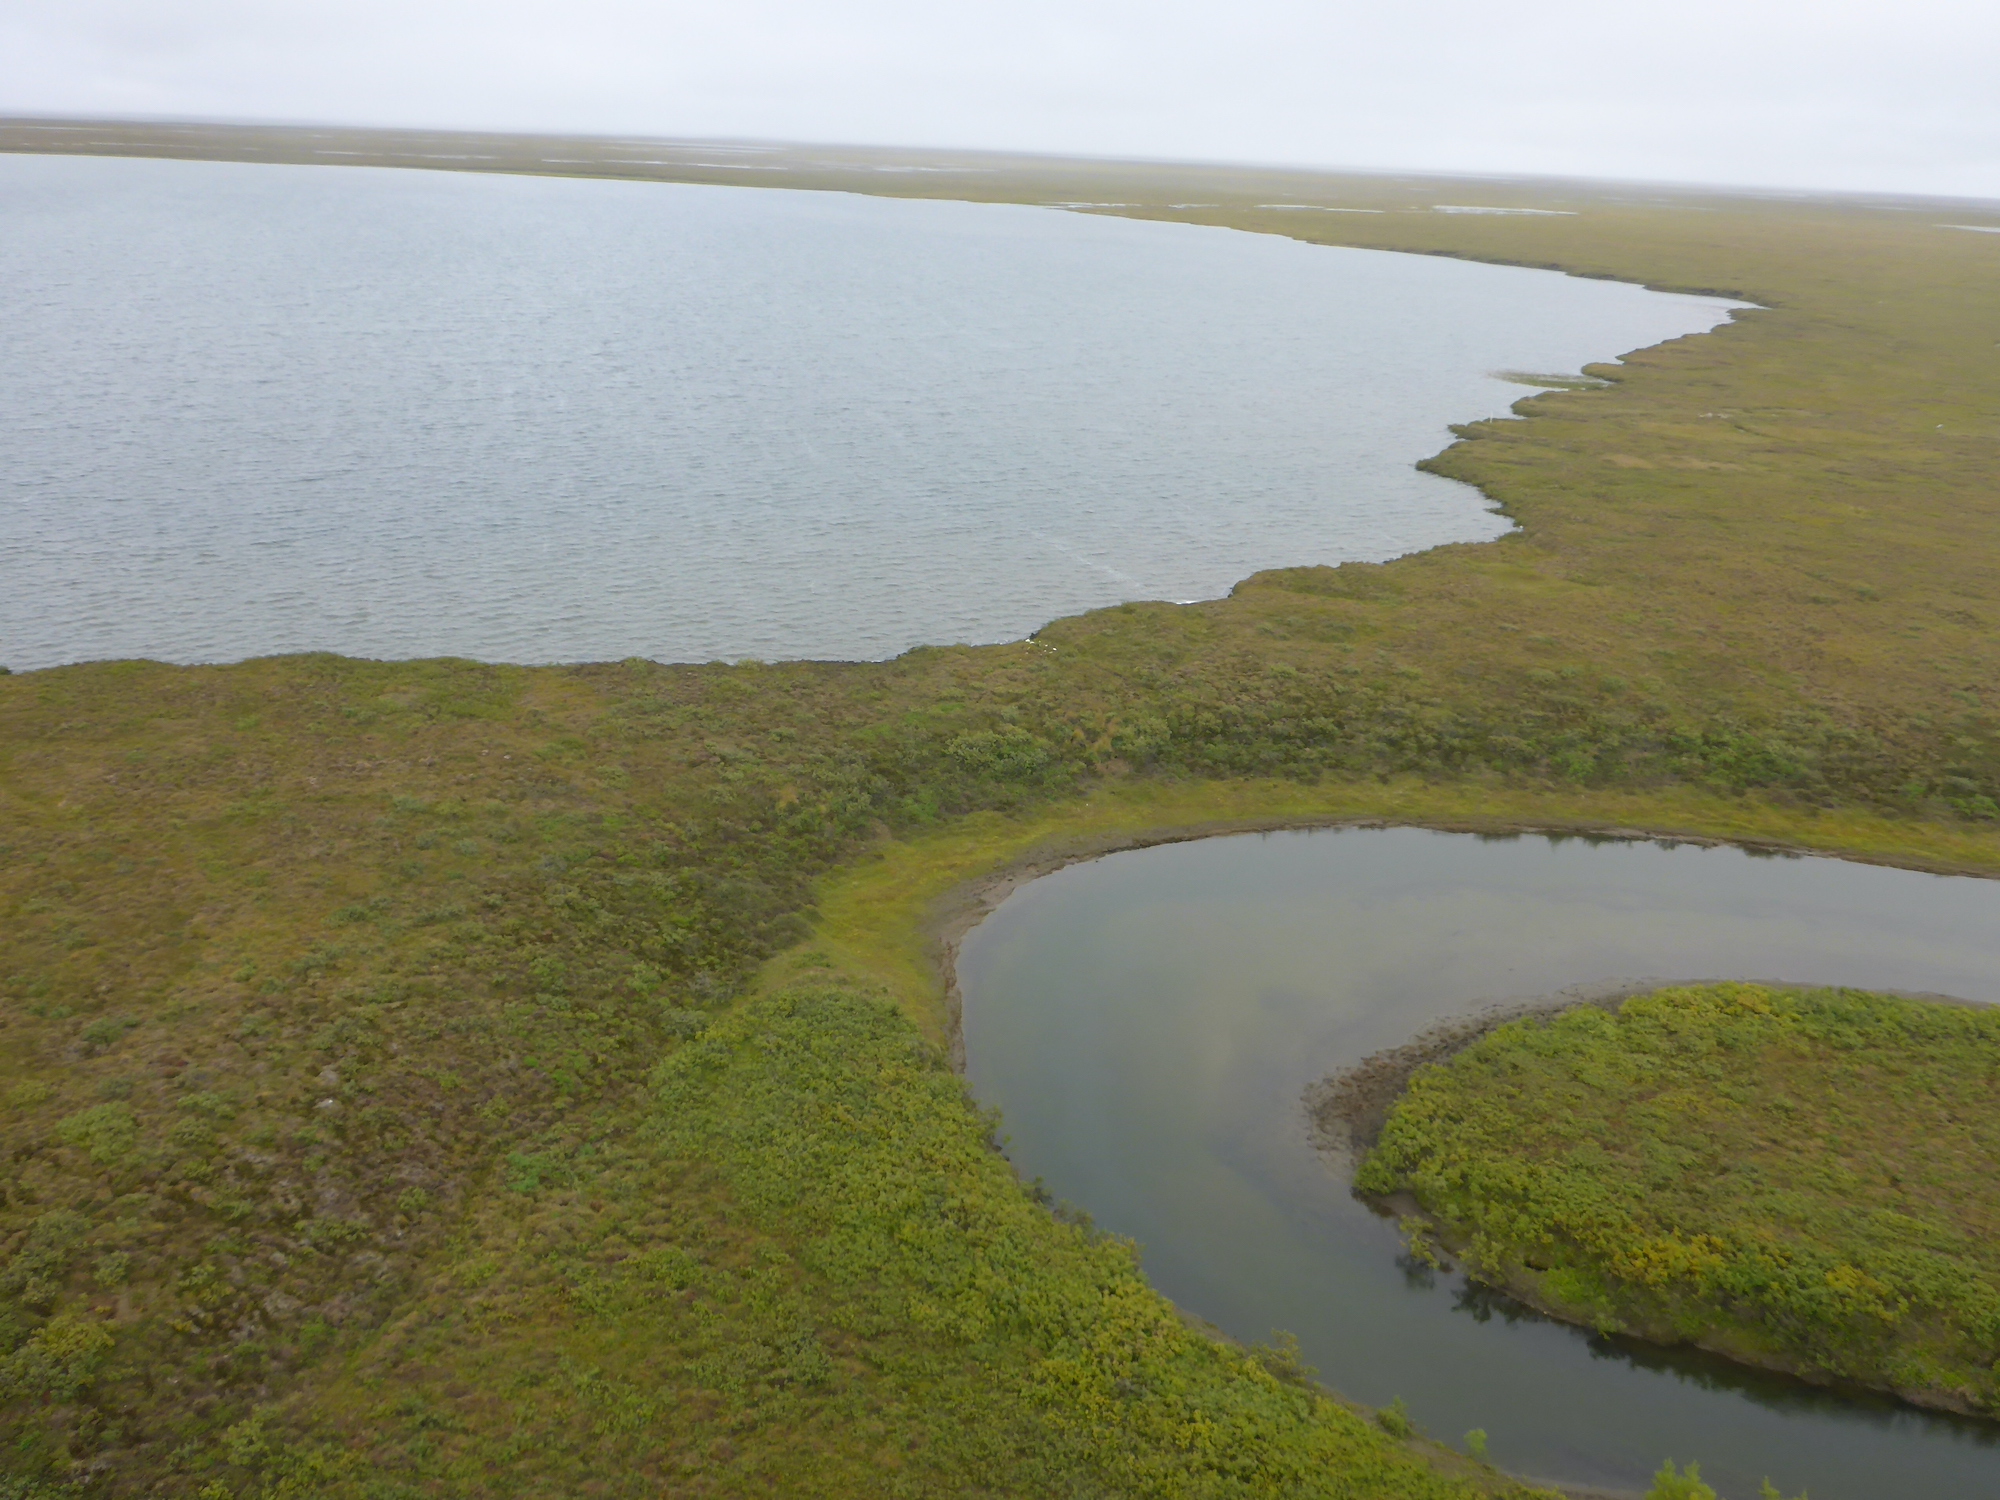 Two bodies of water are separated by an isthmus of green tundra.